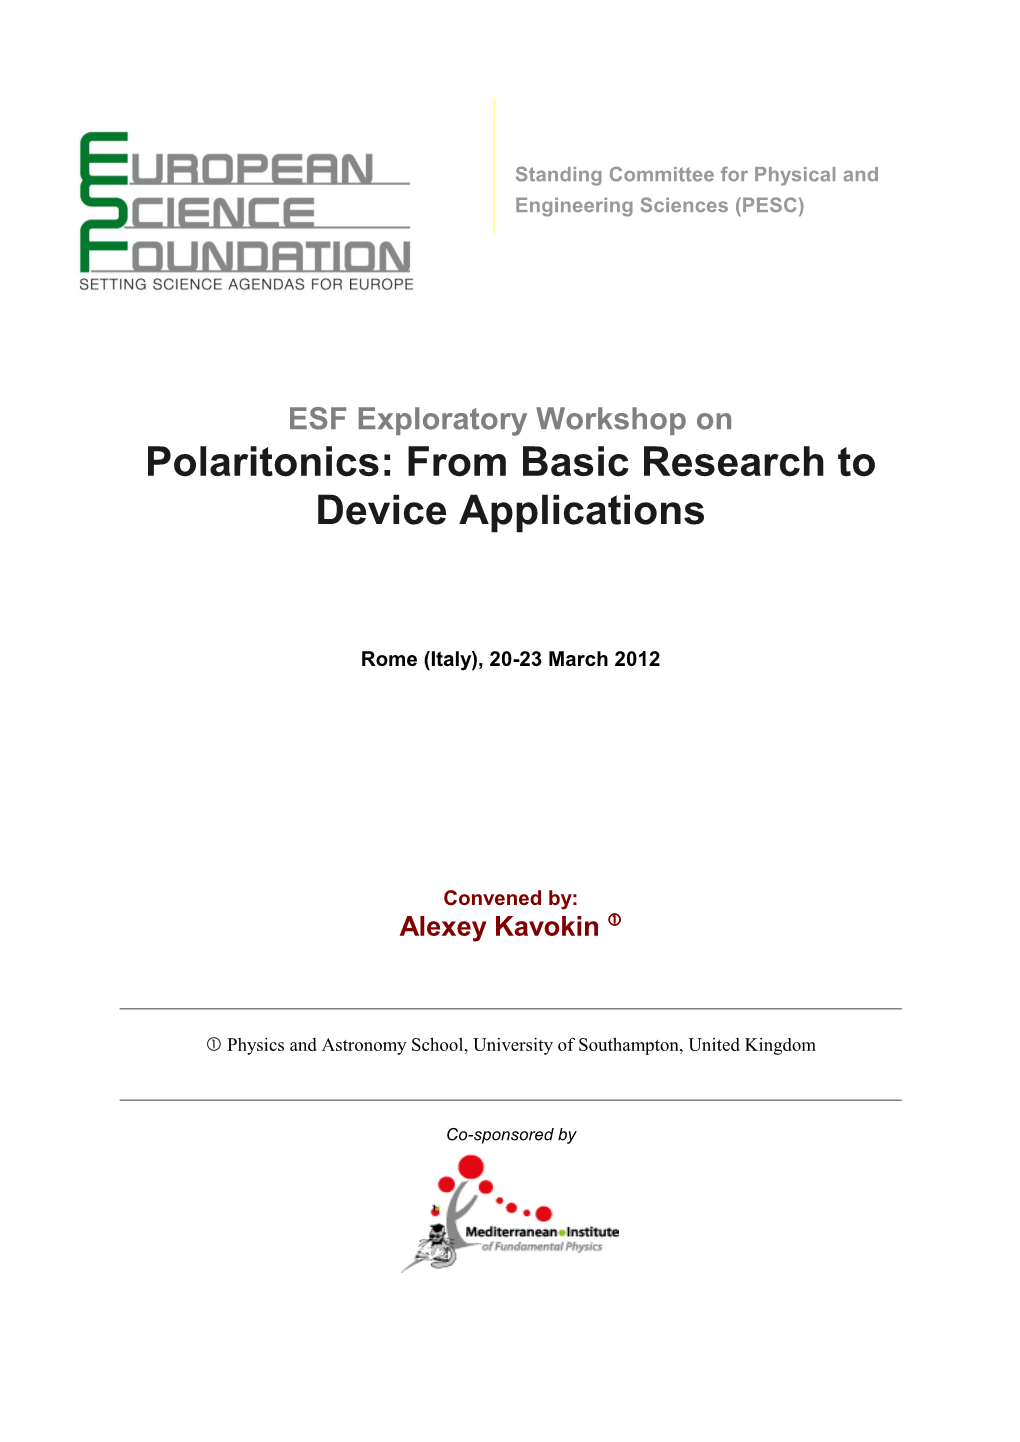 Polaritonics: from Basic Research to Device Applications